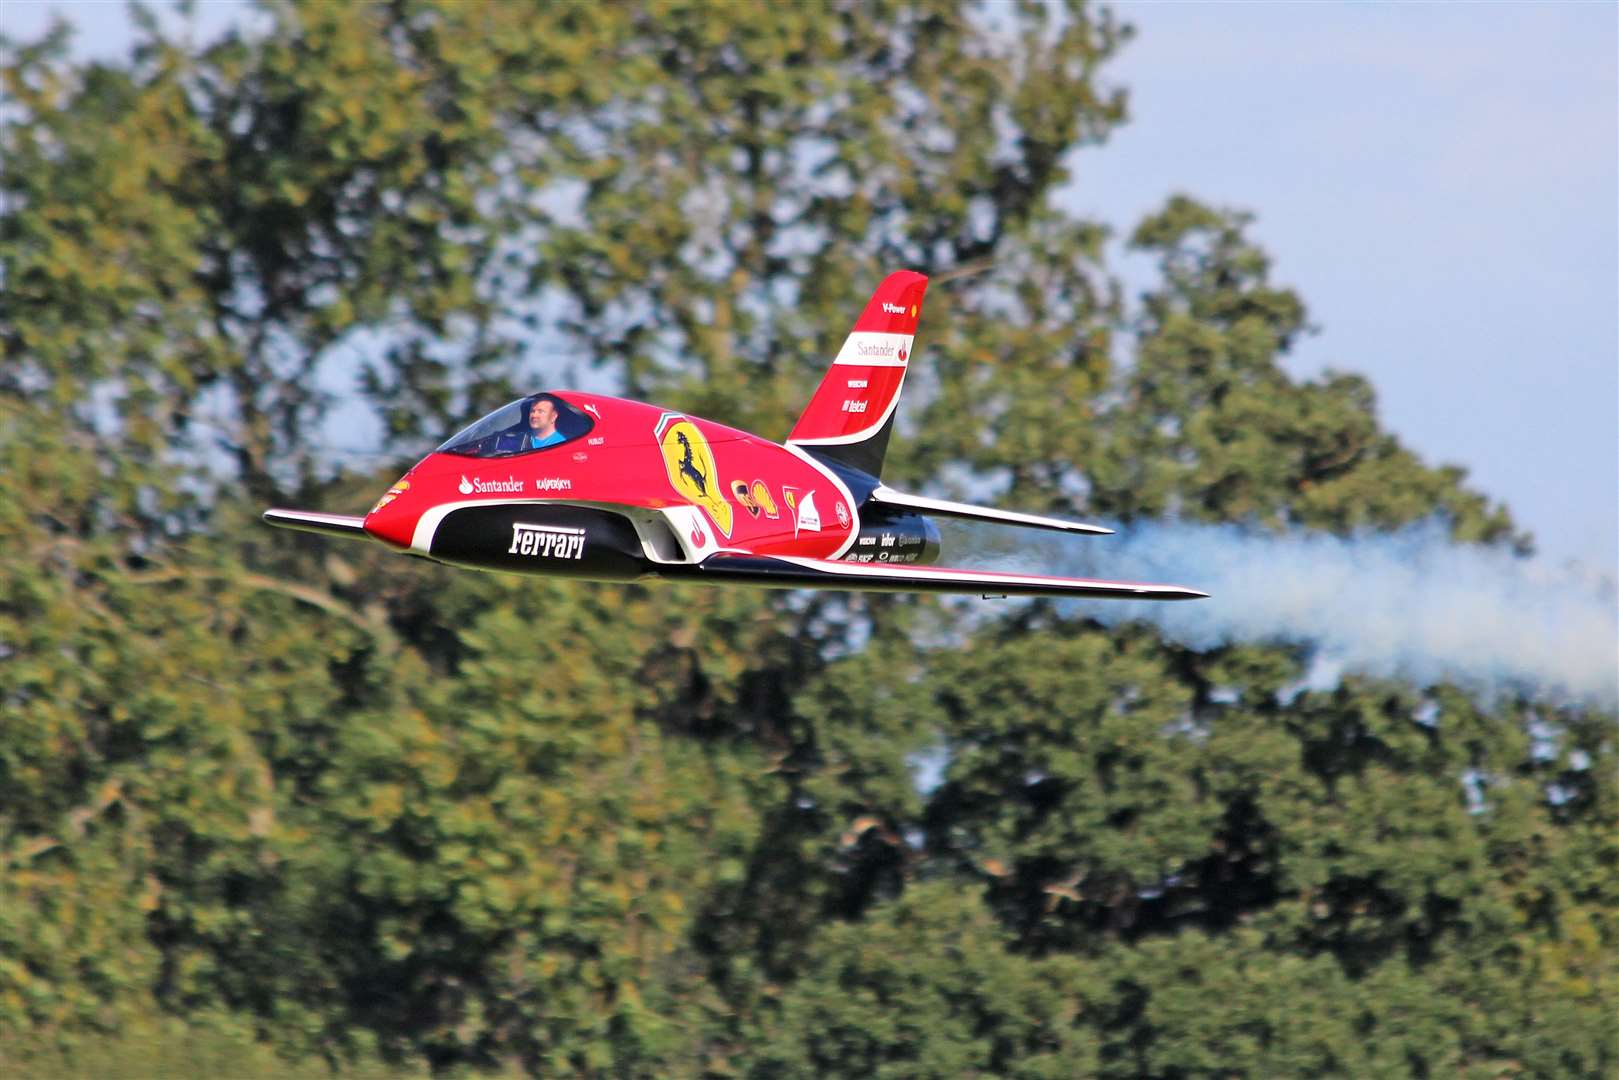 Win a great family day out at the Southern Model Show in Ashford. Picture: Headcorn Aerodrome